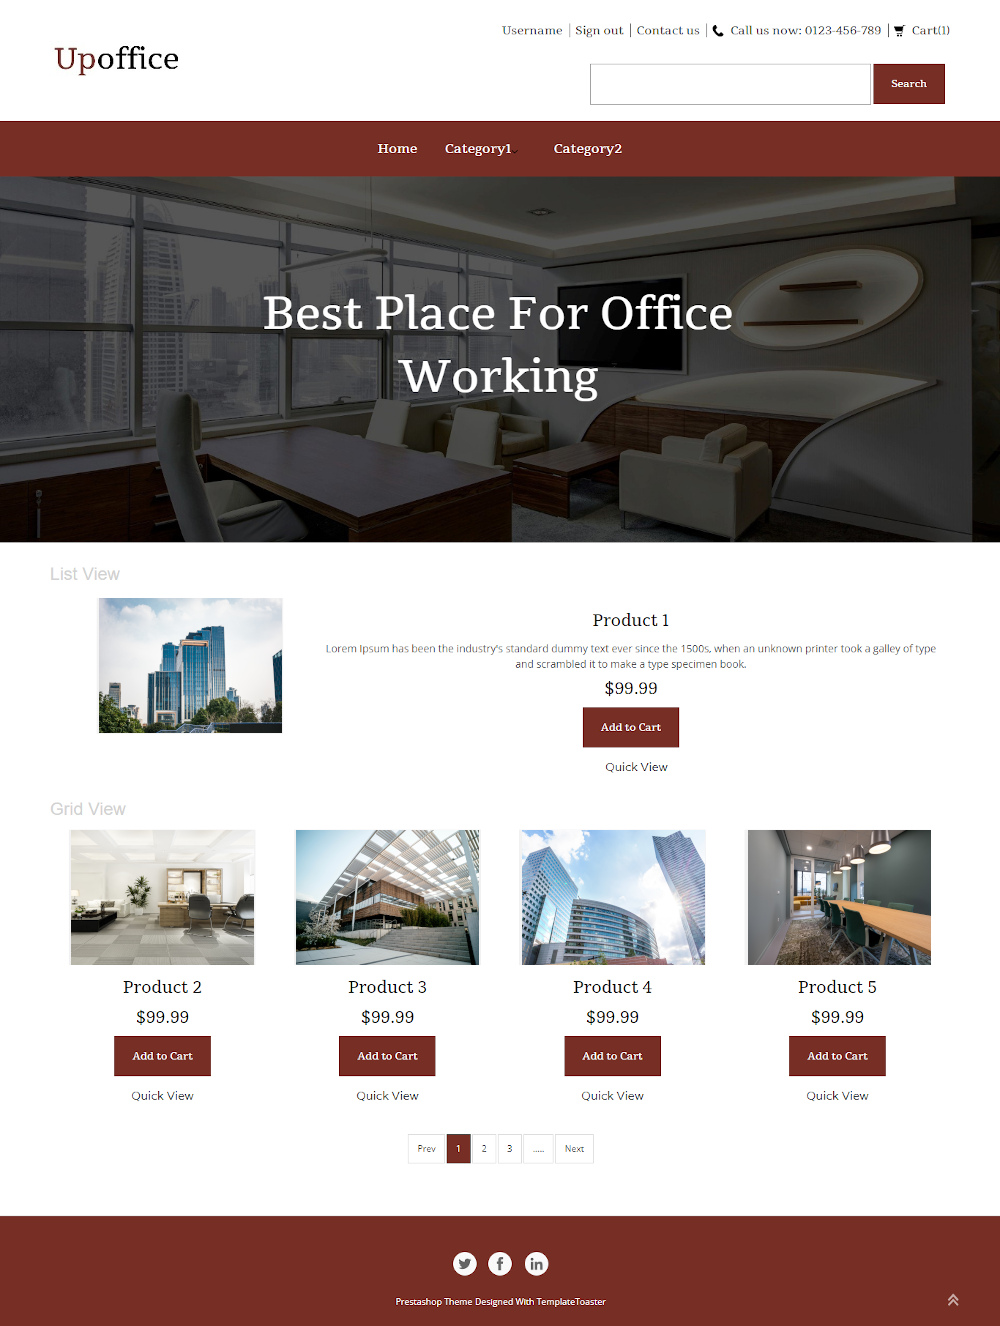 Upoffice - Online Office Space Property Store PrestaShop Theme